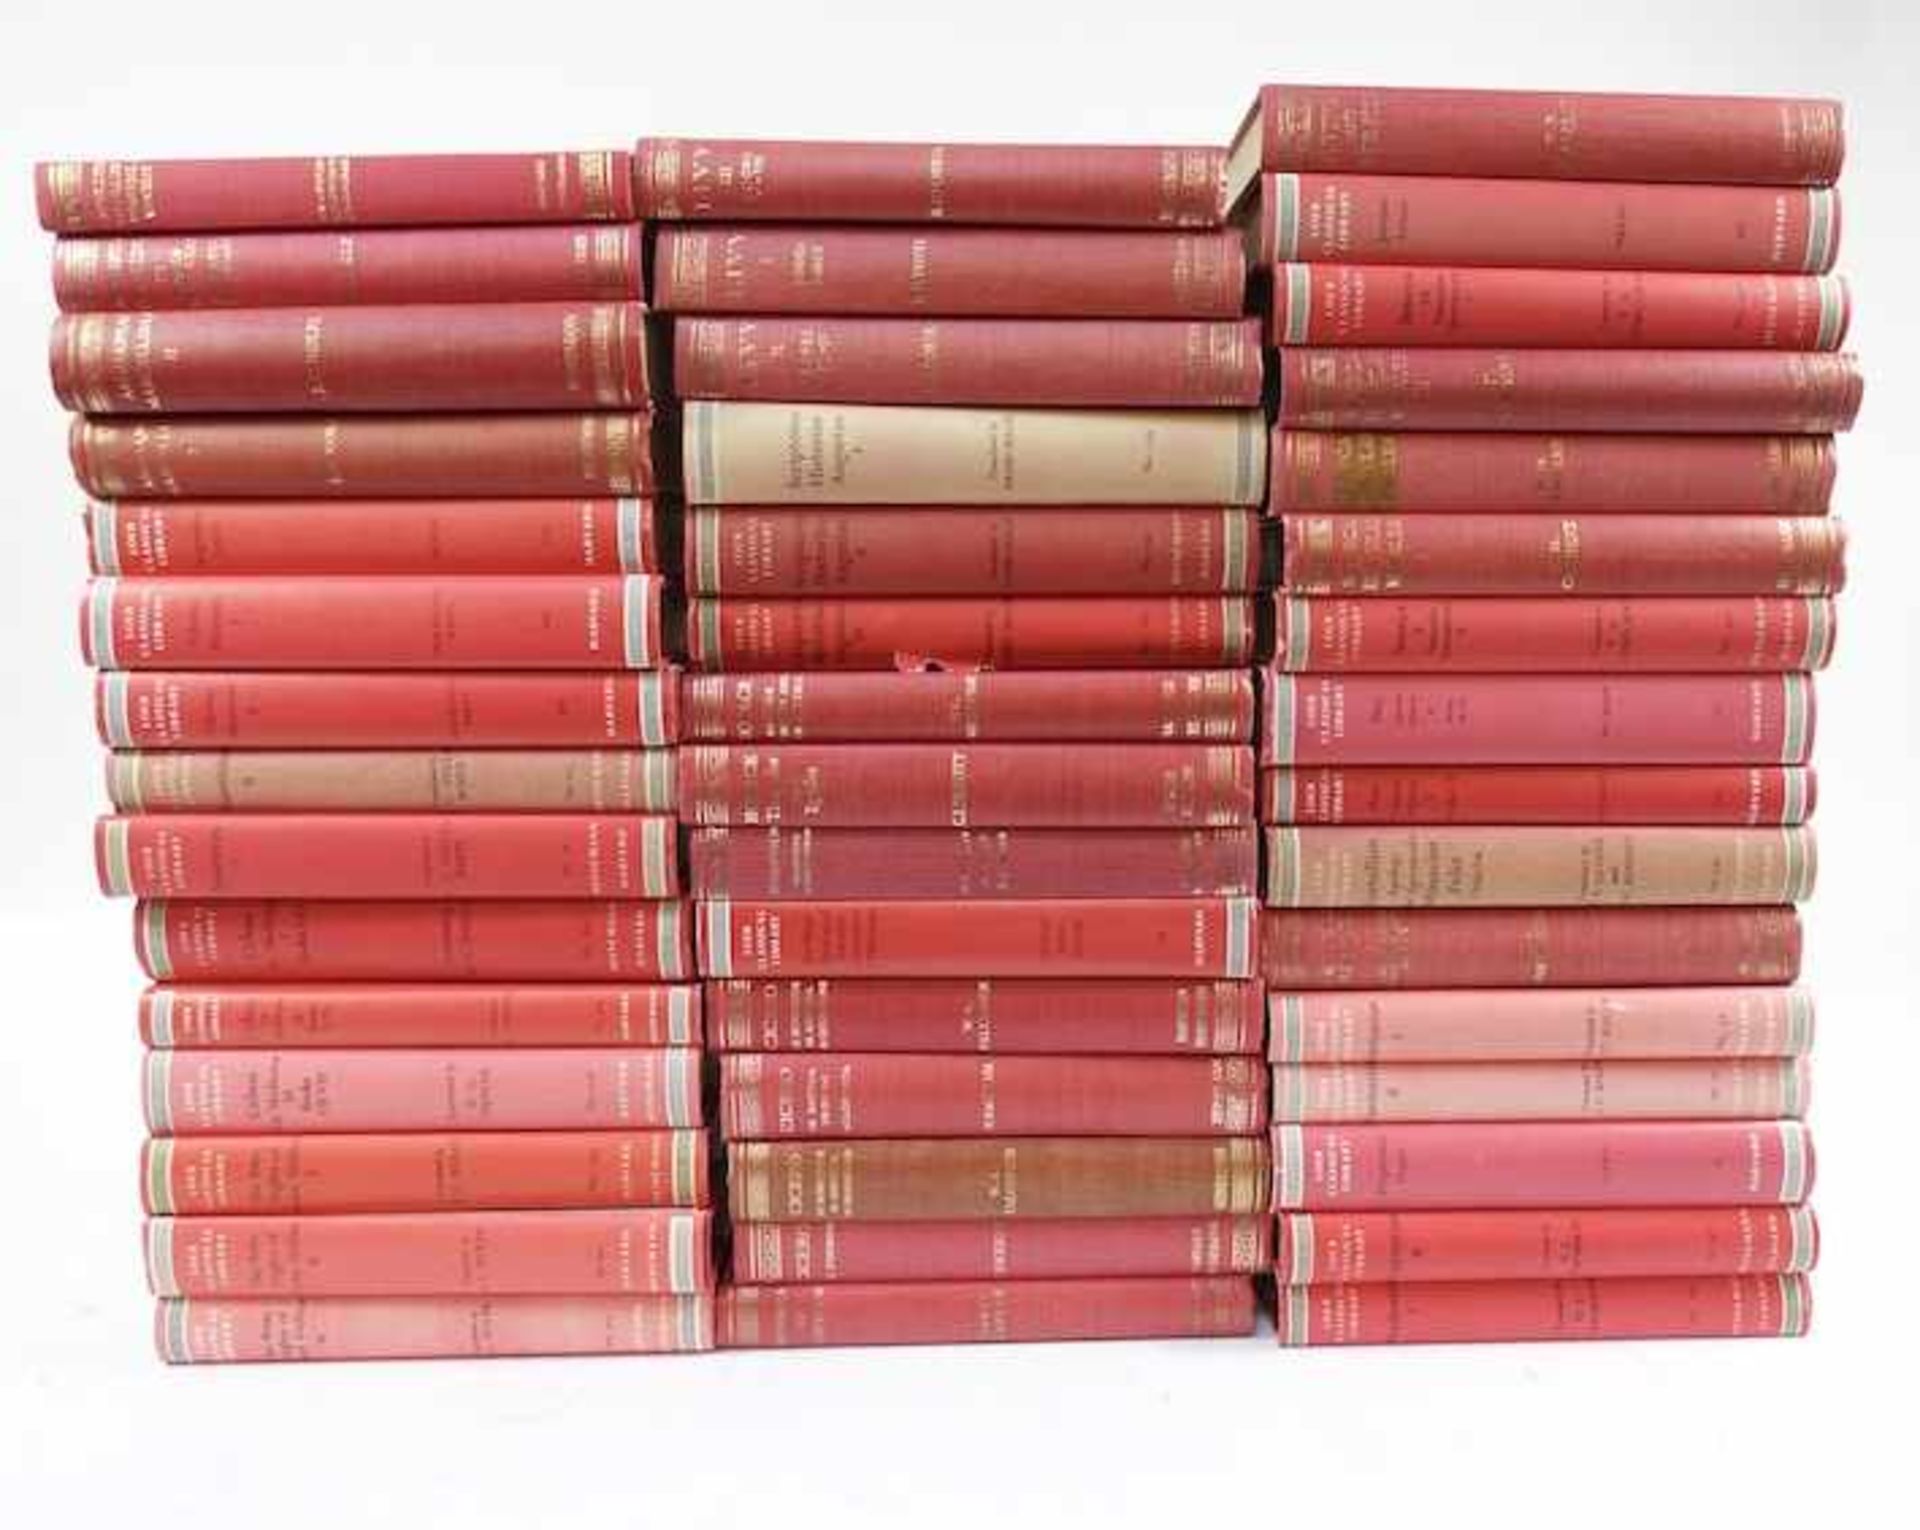 LOEB CLASSICAL LIBRARY. Latin authors. Lond., (1927-2000-). 46 vols. of the series. Ocl. (26) w.